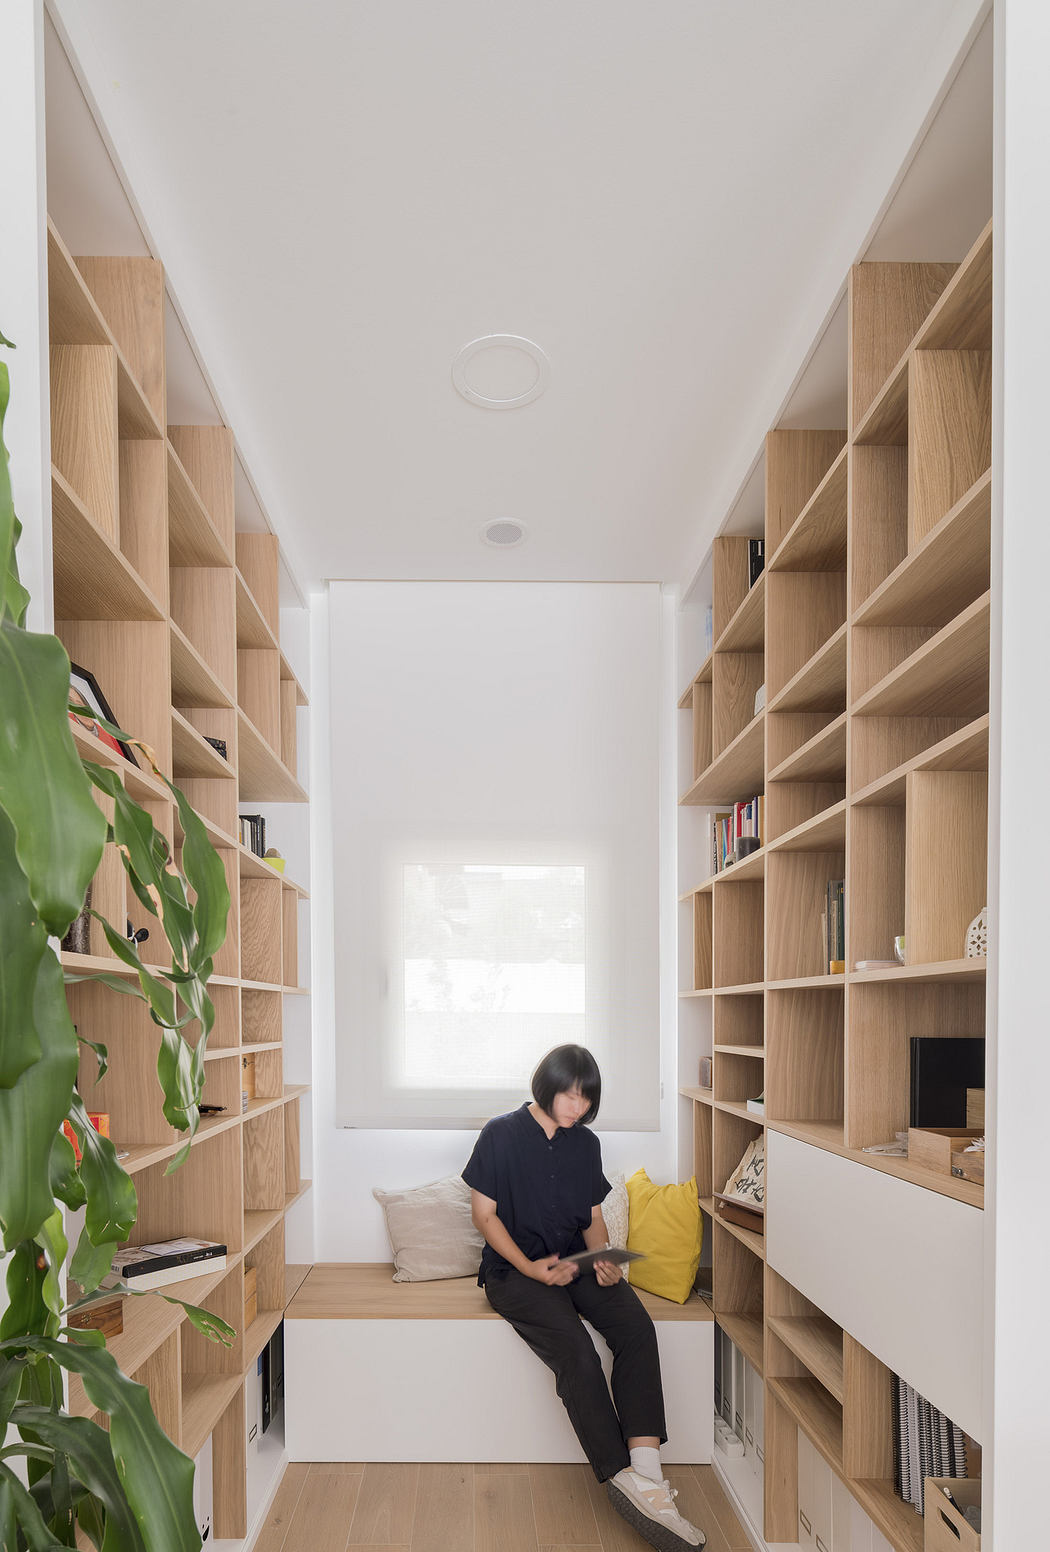 Bright minimalist room with wooden shelving and a seated person.